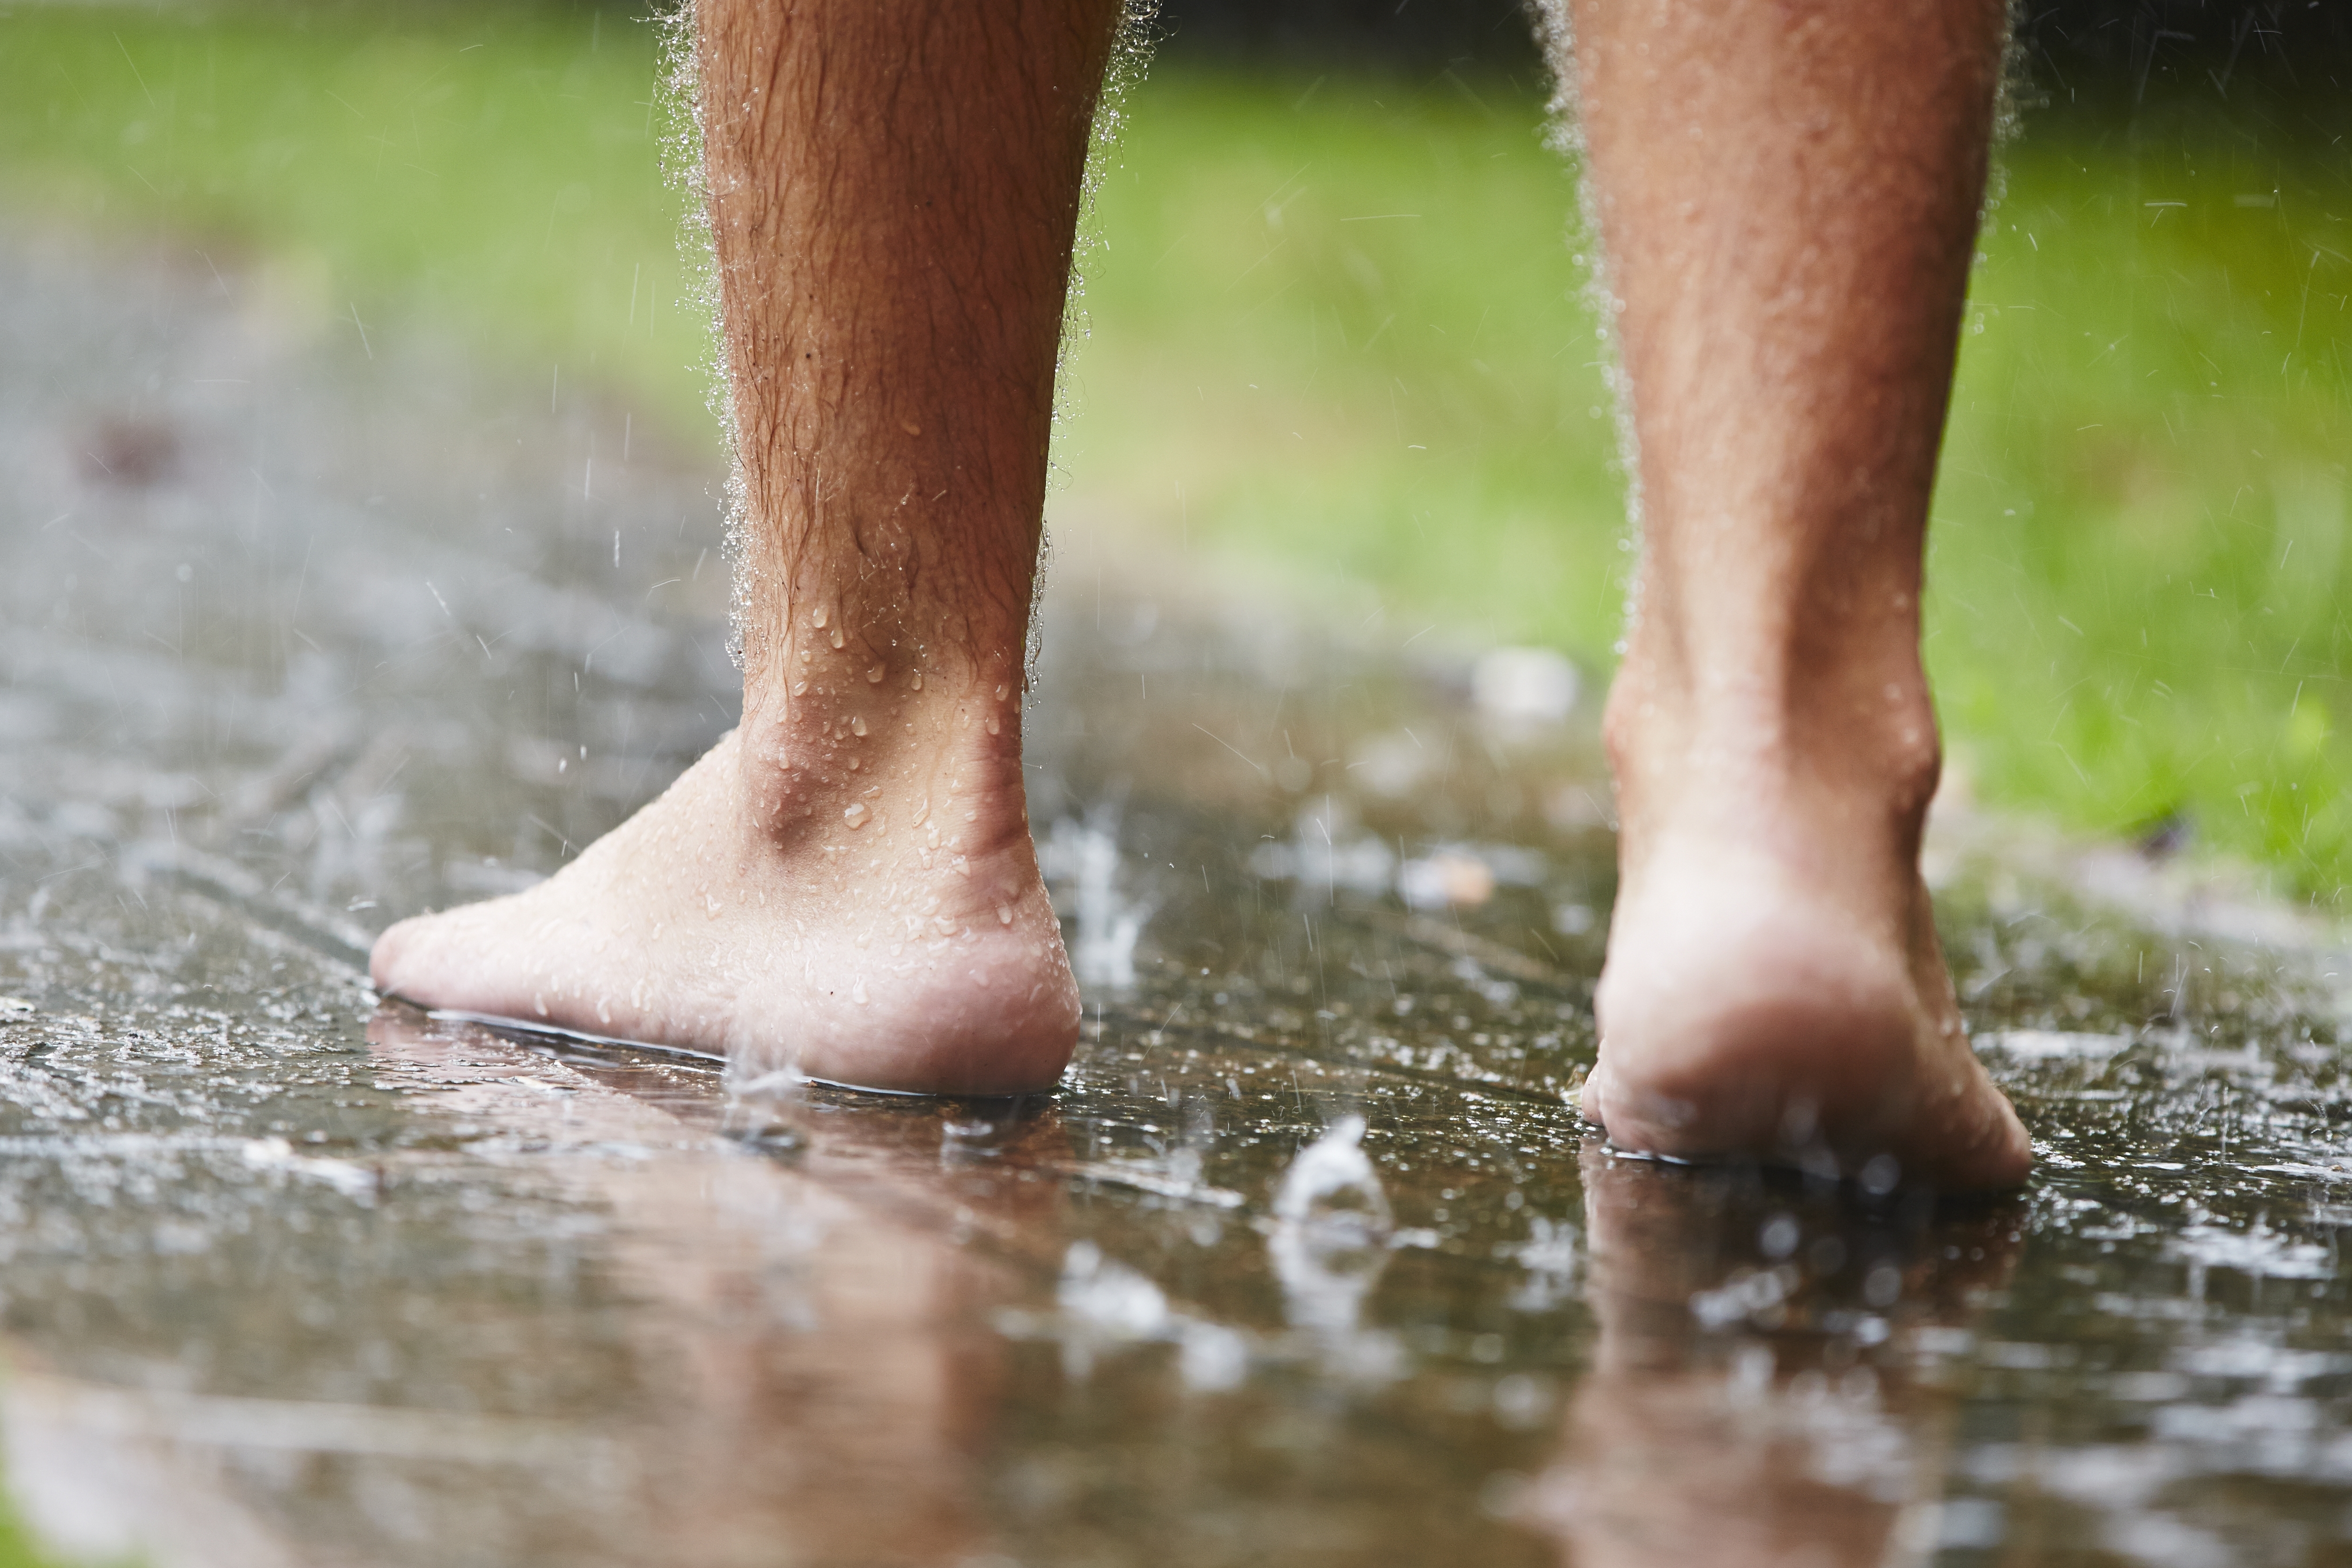 Man walking in rain without shoes